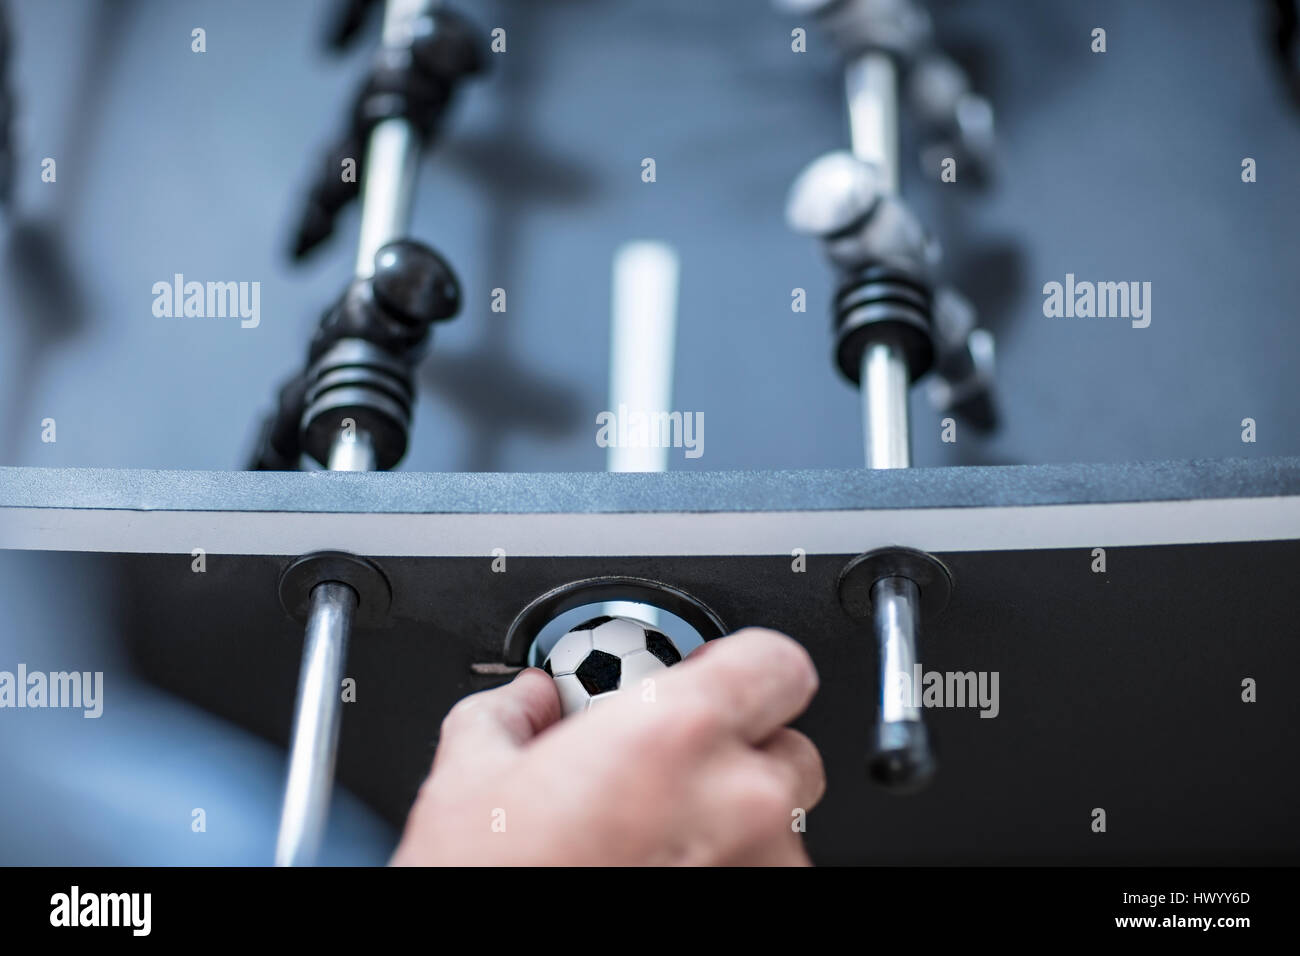 Hand and foosball table, close-up Stock Photo